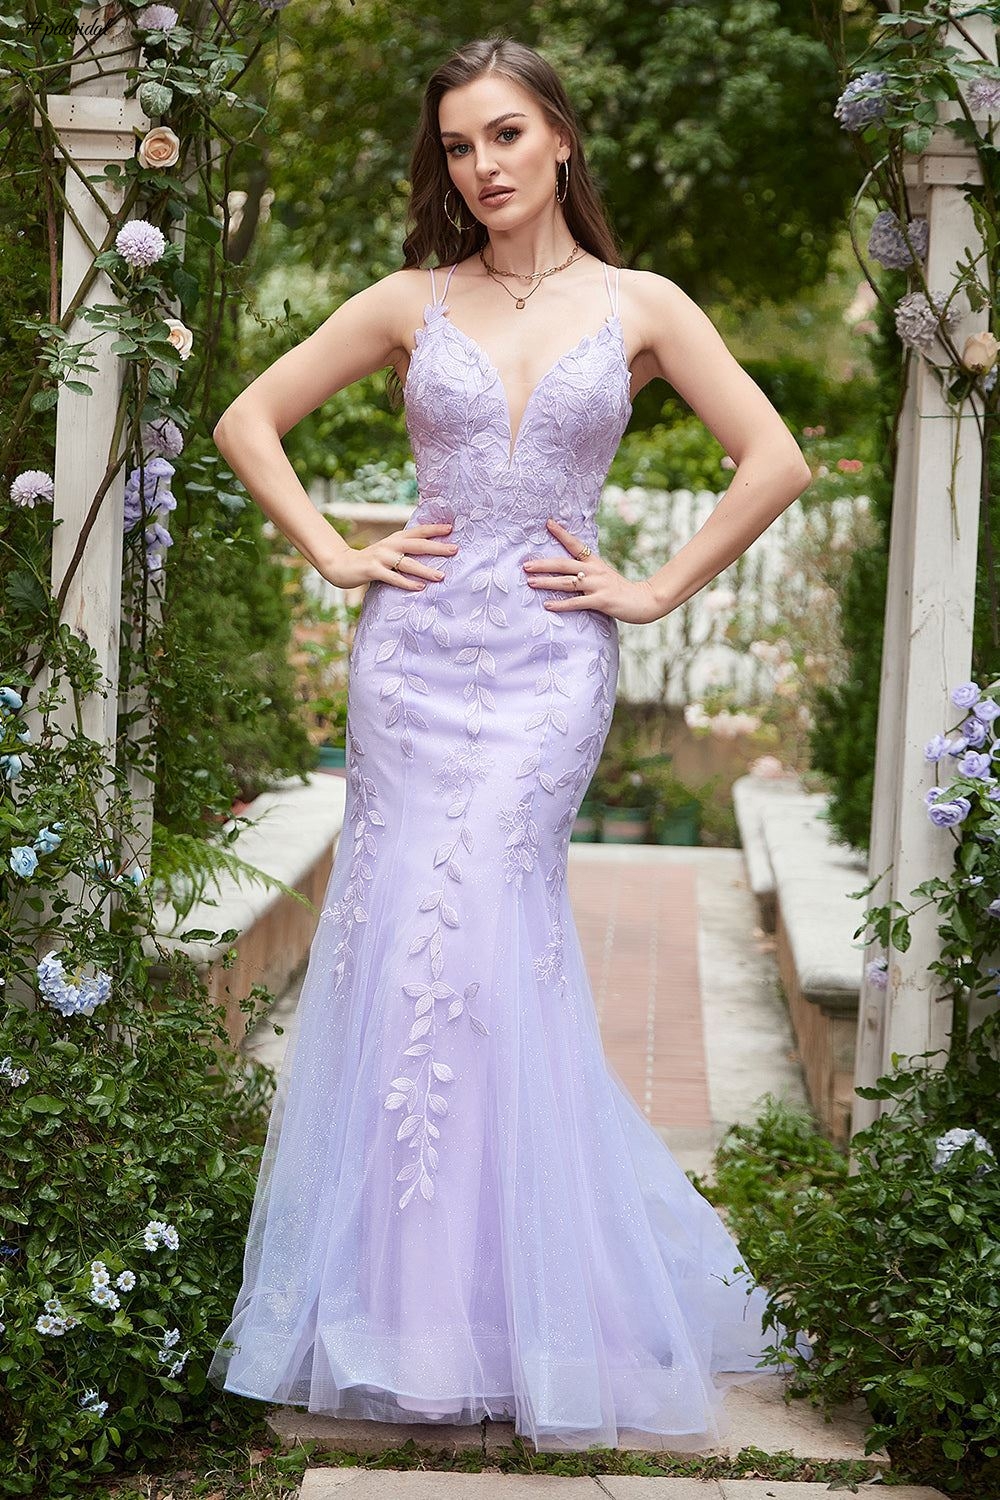 www.pdbridal.com offer cheap wedding dresses & prom dresses with factory price